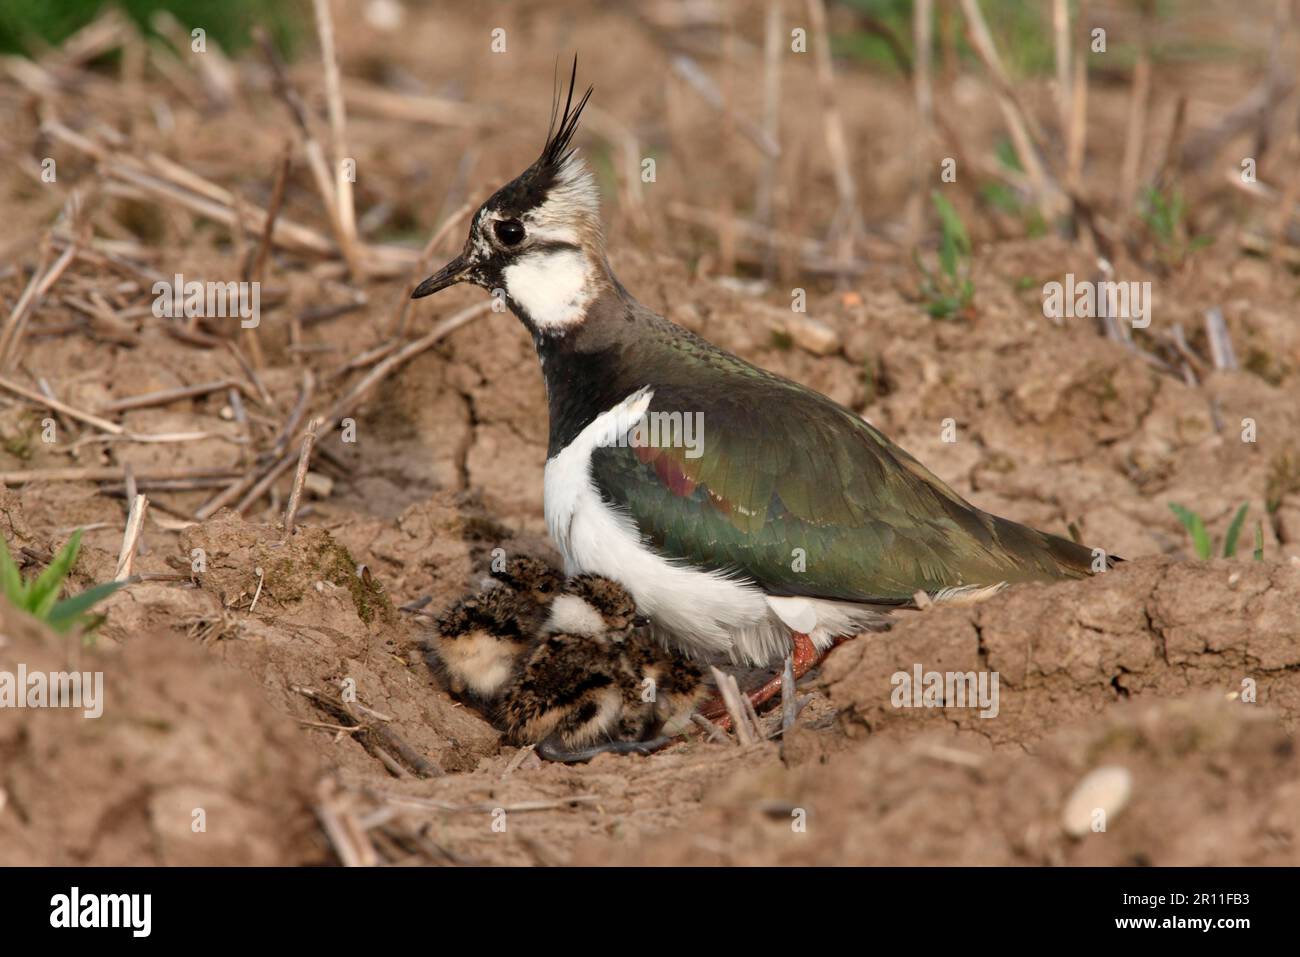 Northern northern lapwing (Vanellus vanellus), adult female, harbouring chicks, standing in field, Midlands, England, Spring Stock Photo